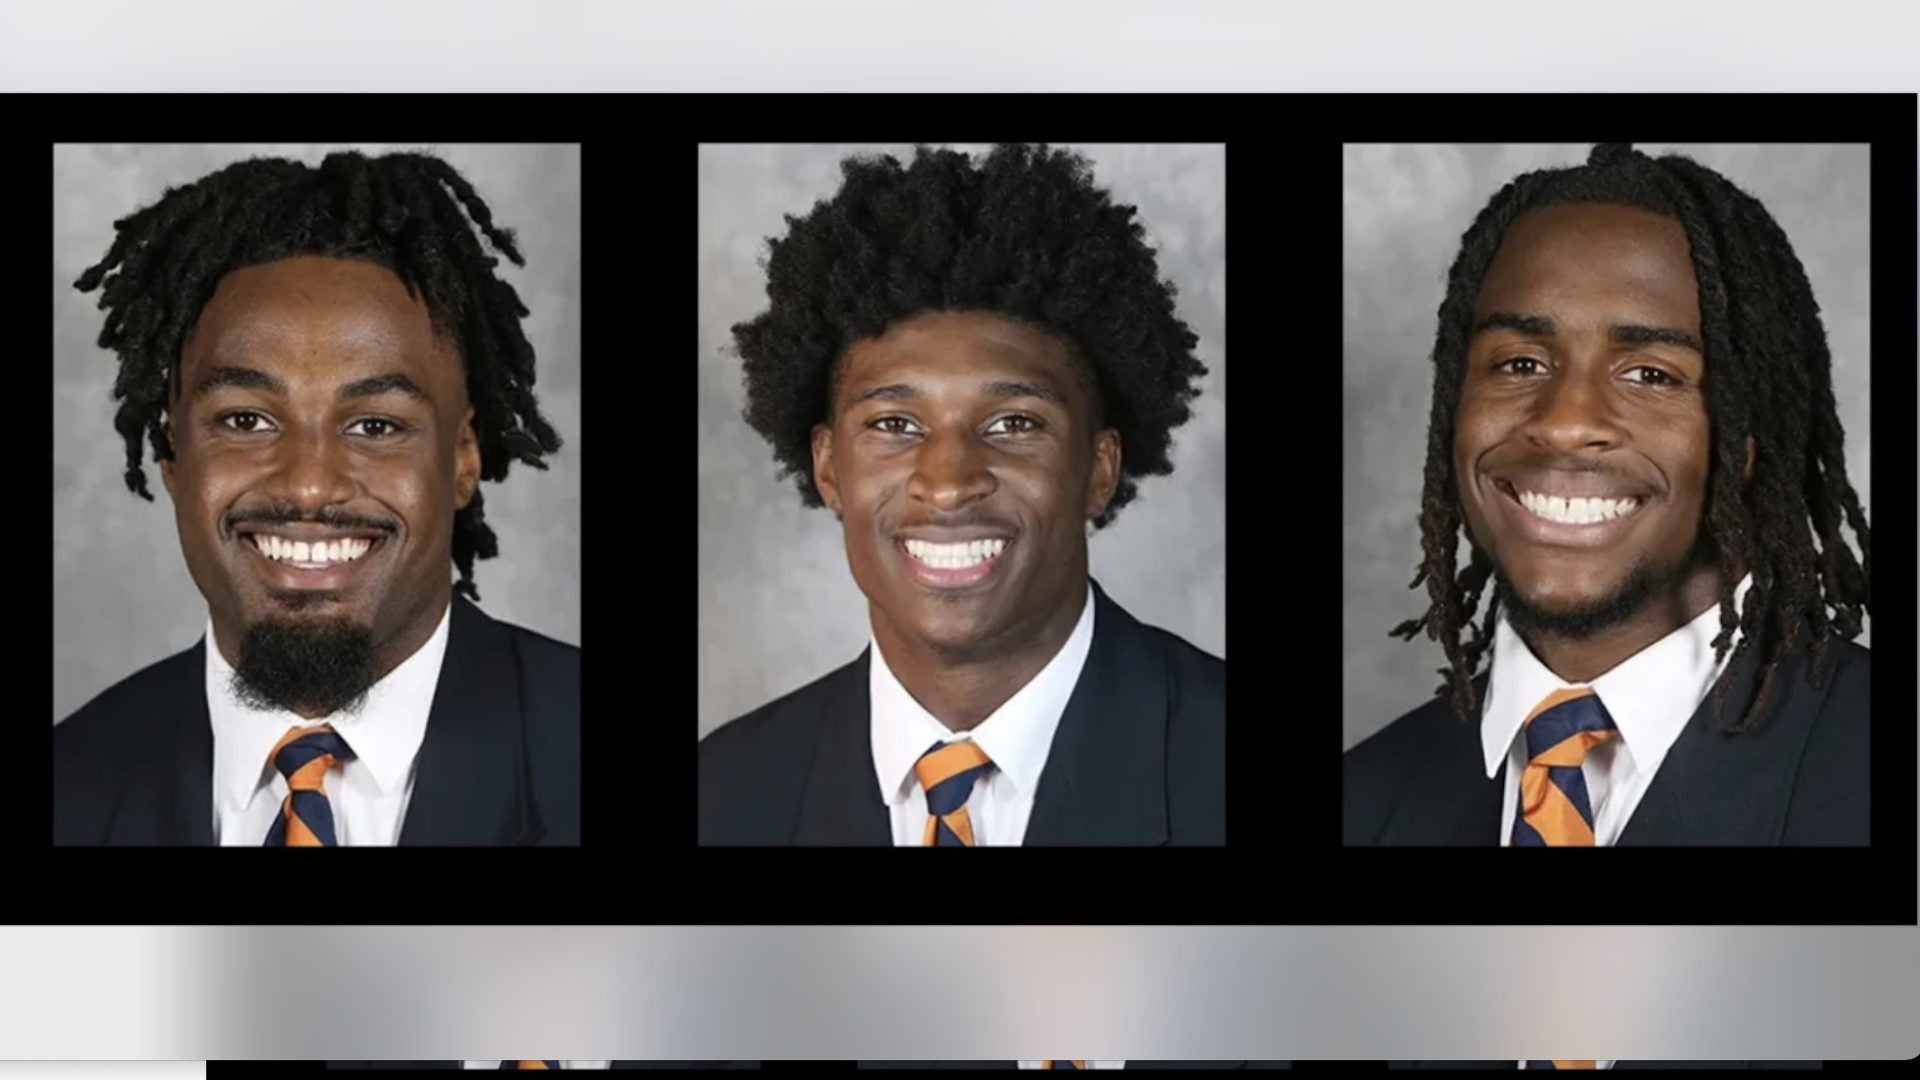 Slain UVA College Football Players Honored With Touching Tribute At The Start Of The NFL Draft